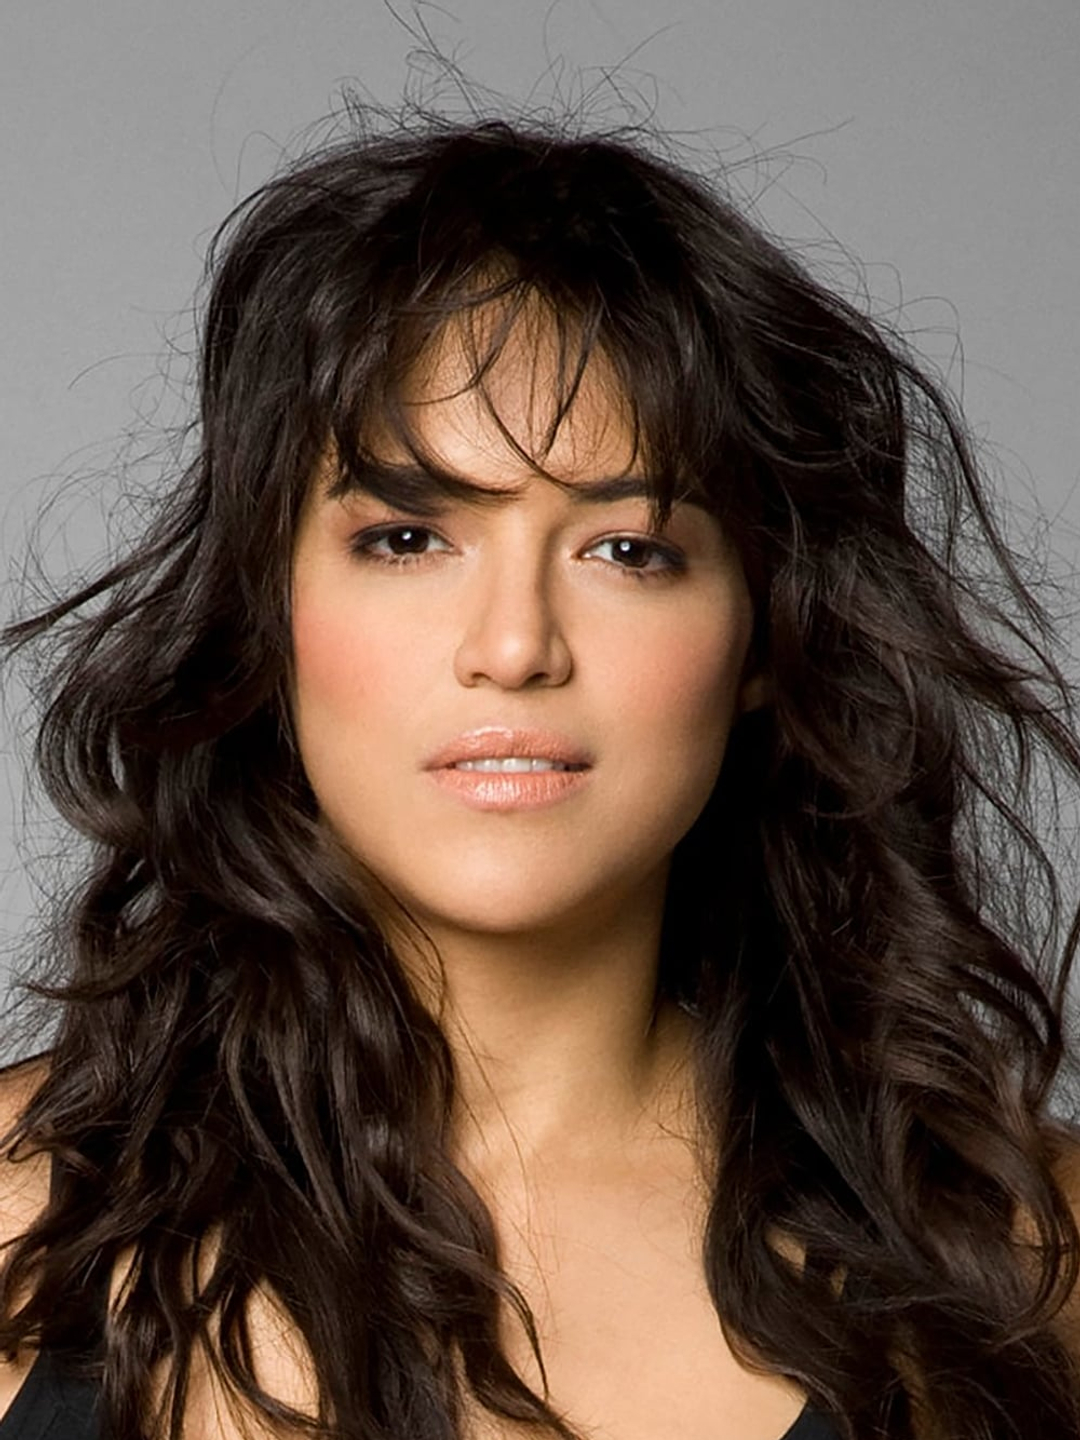 Michelle Rodriguez life story